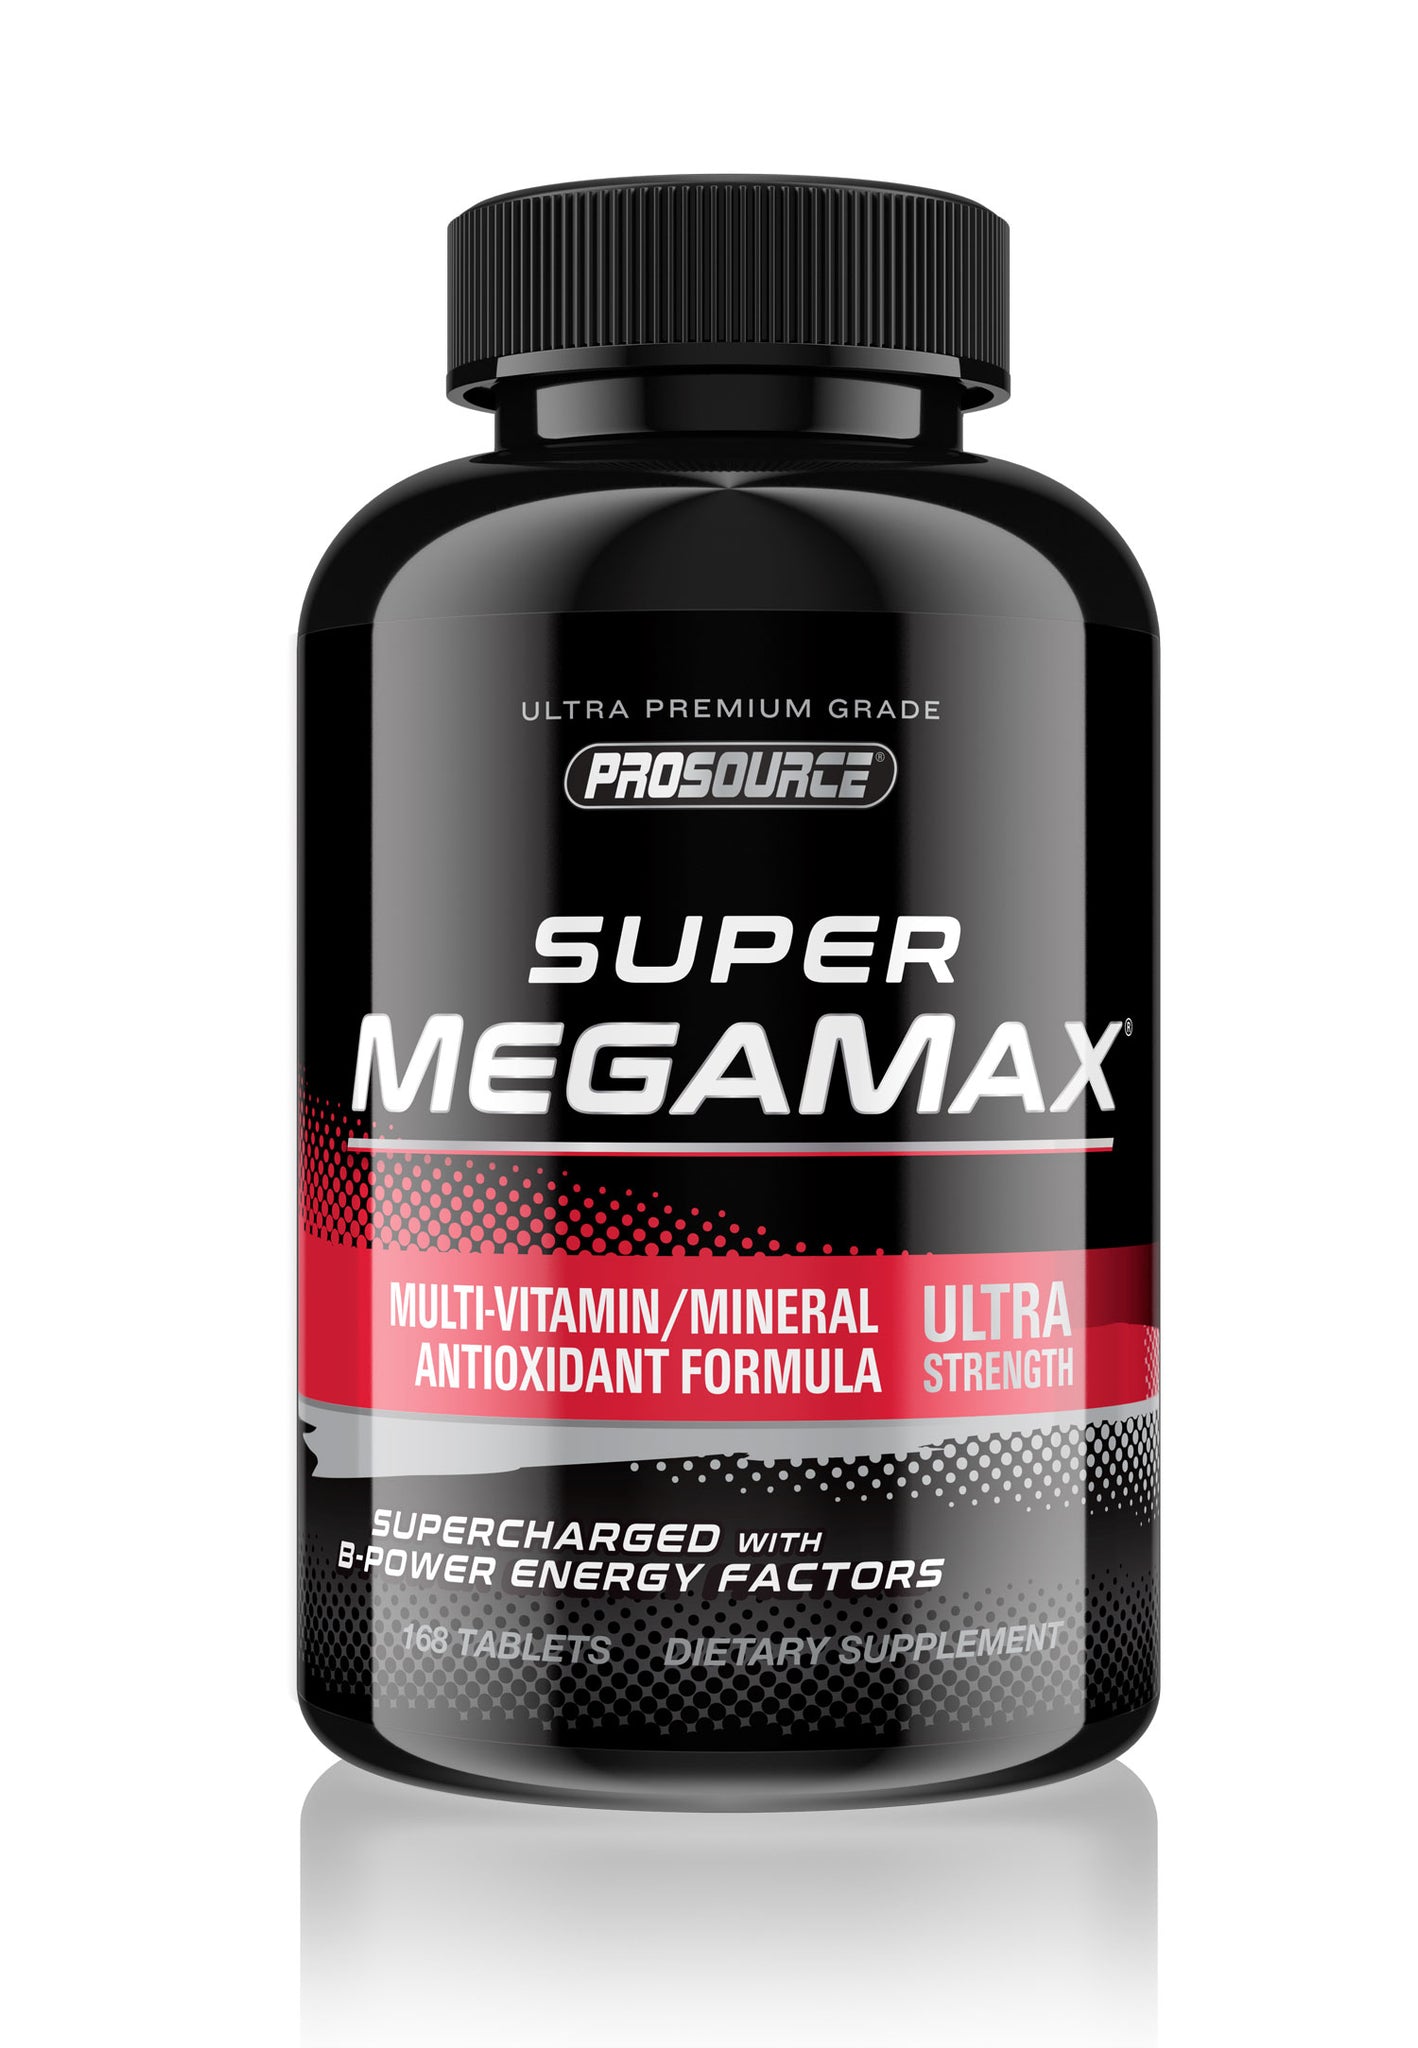 Super MegaMax multi-vitamin/mineral antioxidant formula ultra strength supercharged with b-power energy factors 168 tablets